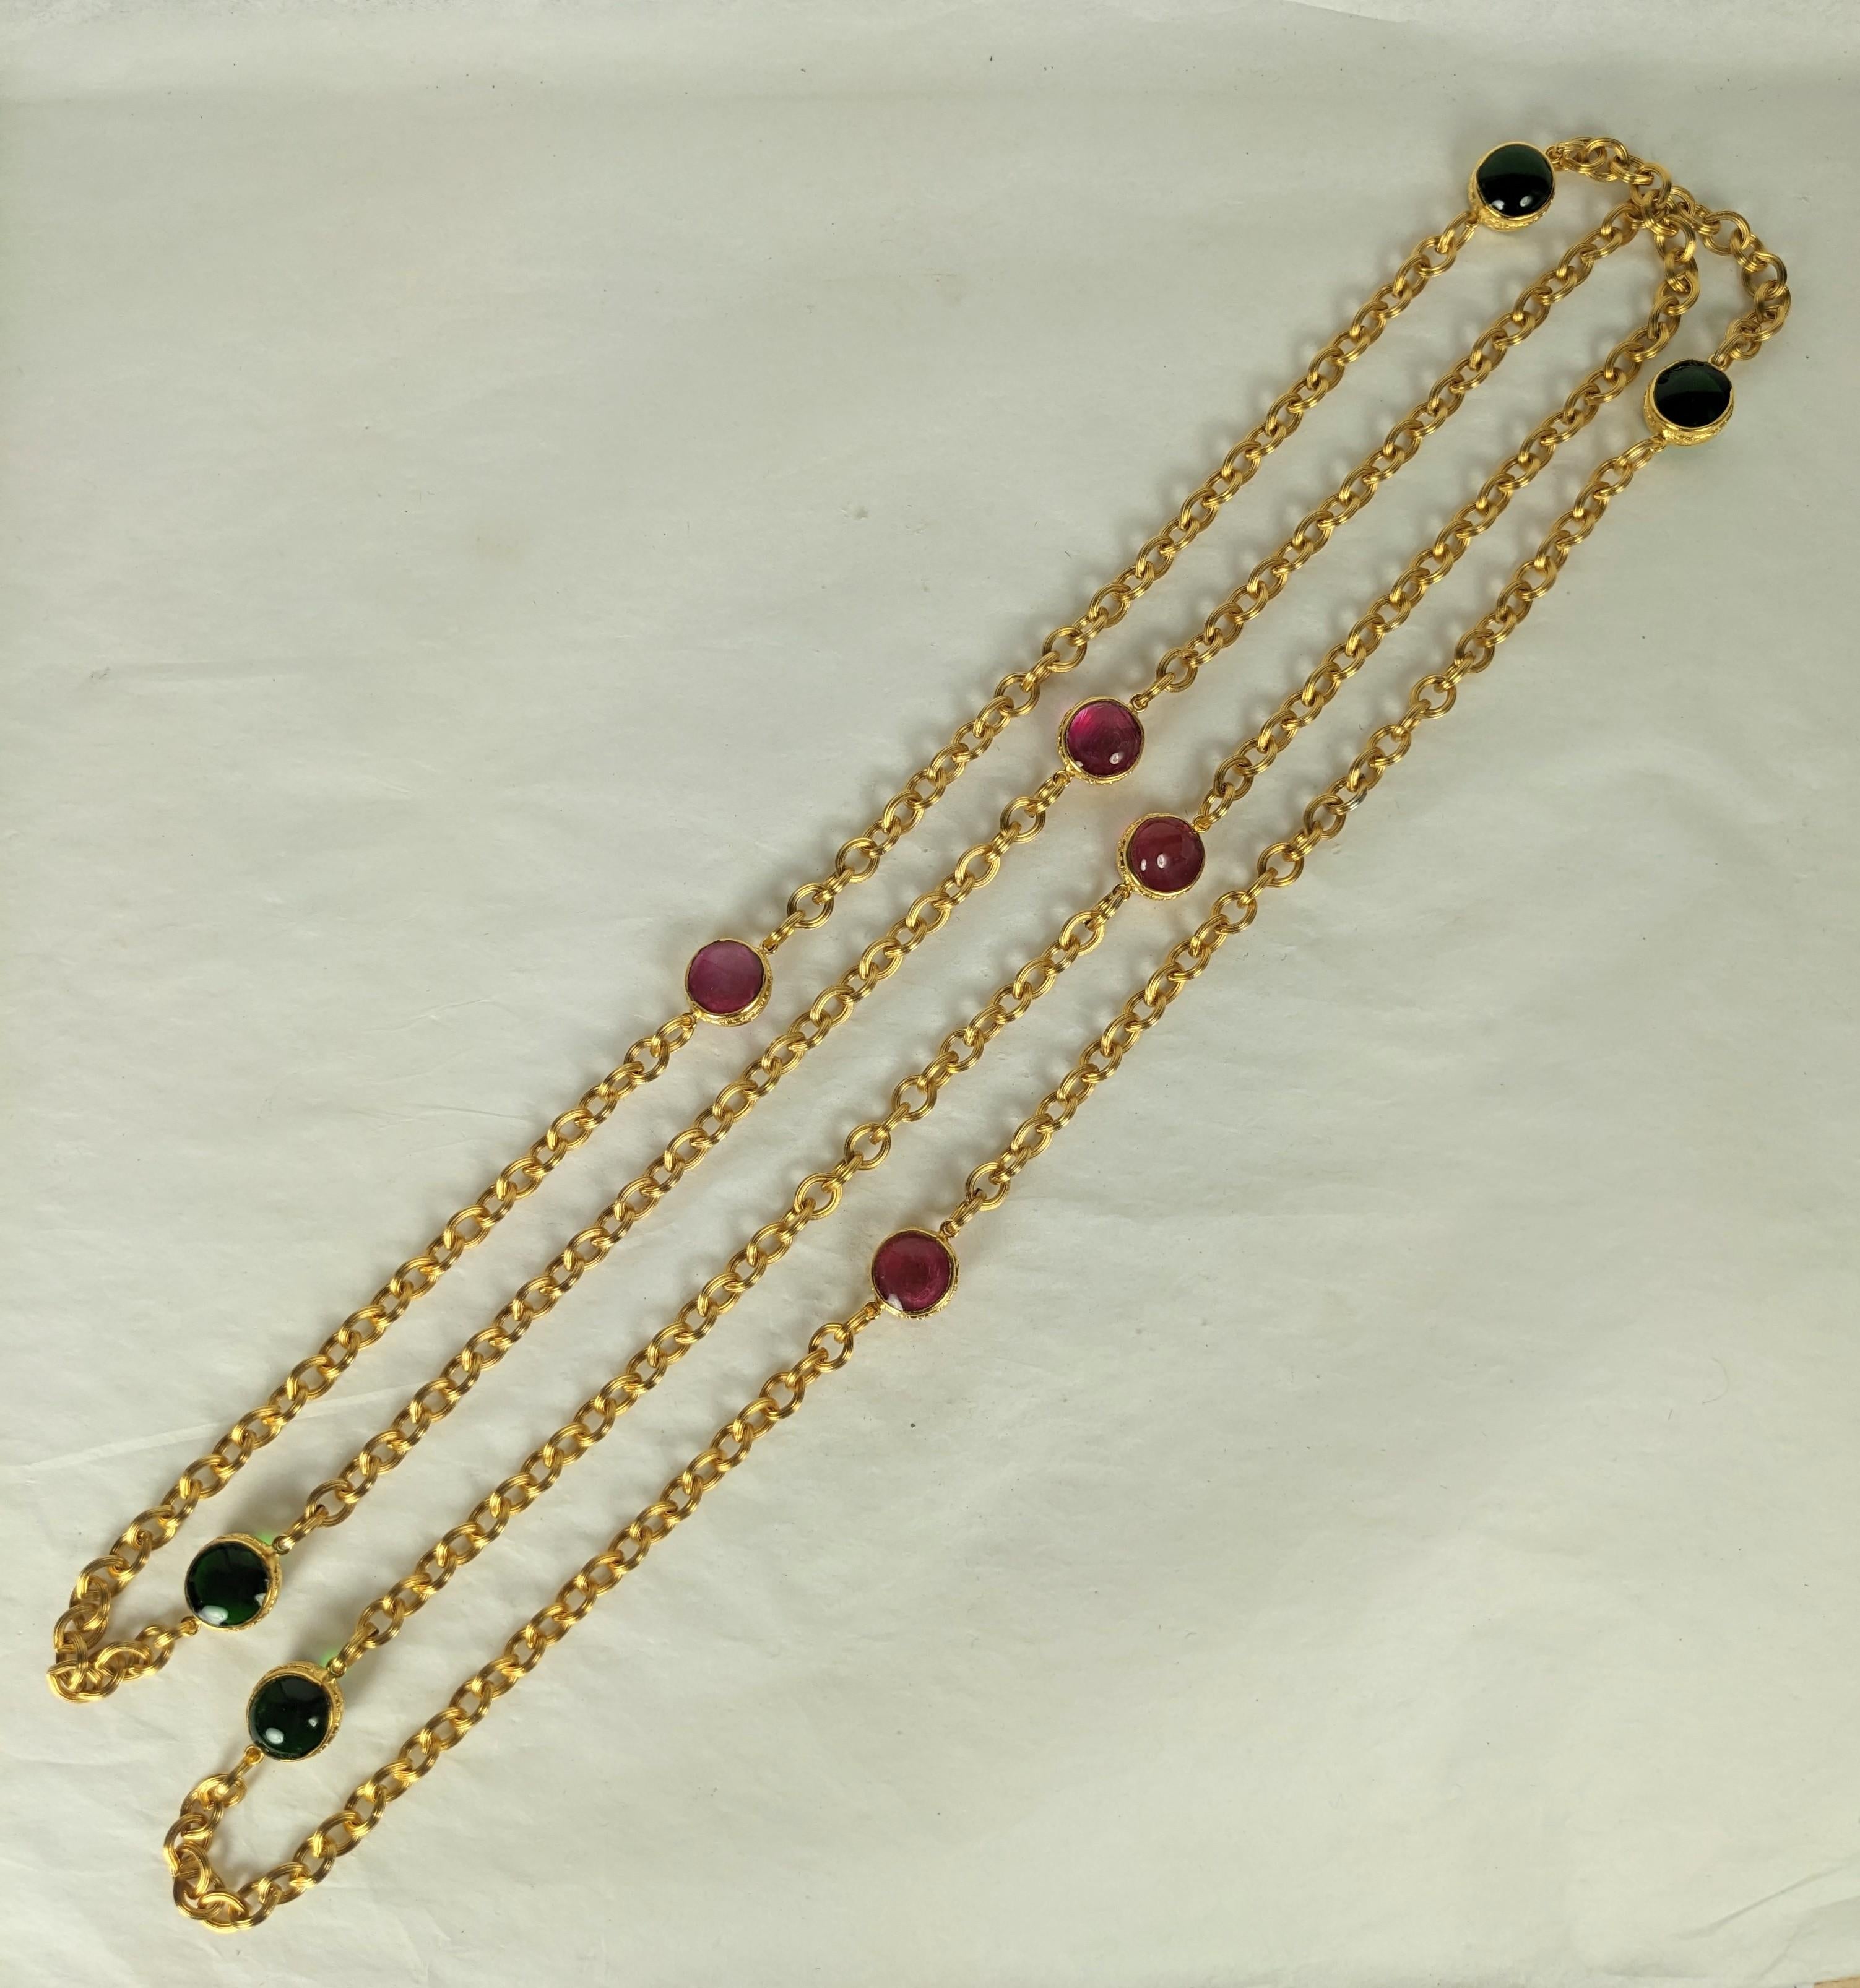 Maison Gripoix for Chanel Renaissance style chain link necklace. Of gilt floral incised bronze bezels with Gripoix poured glass emerald and pale ruby enamel double sided cabocheons on a rich ribbed matte gold link chain. Excellent Condition.